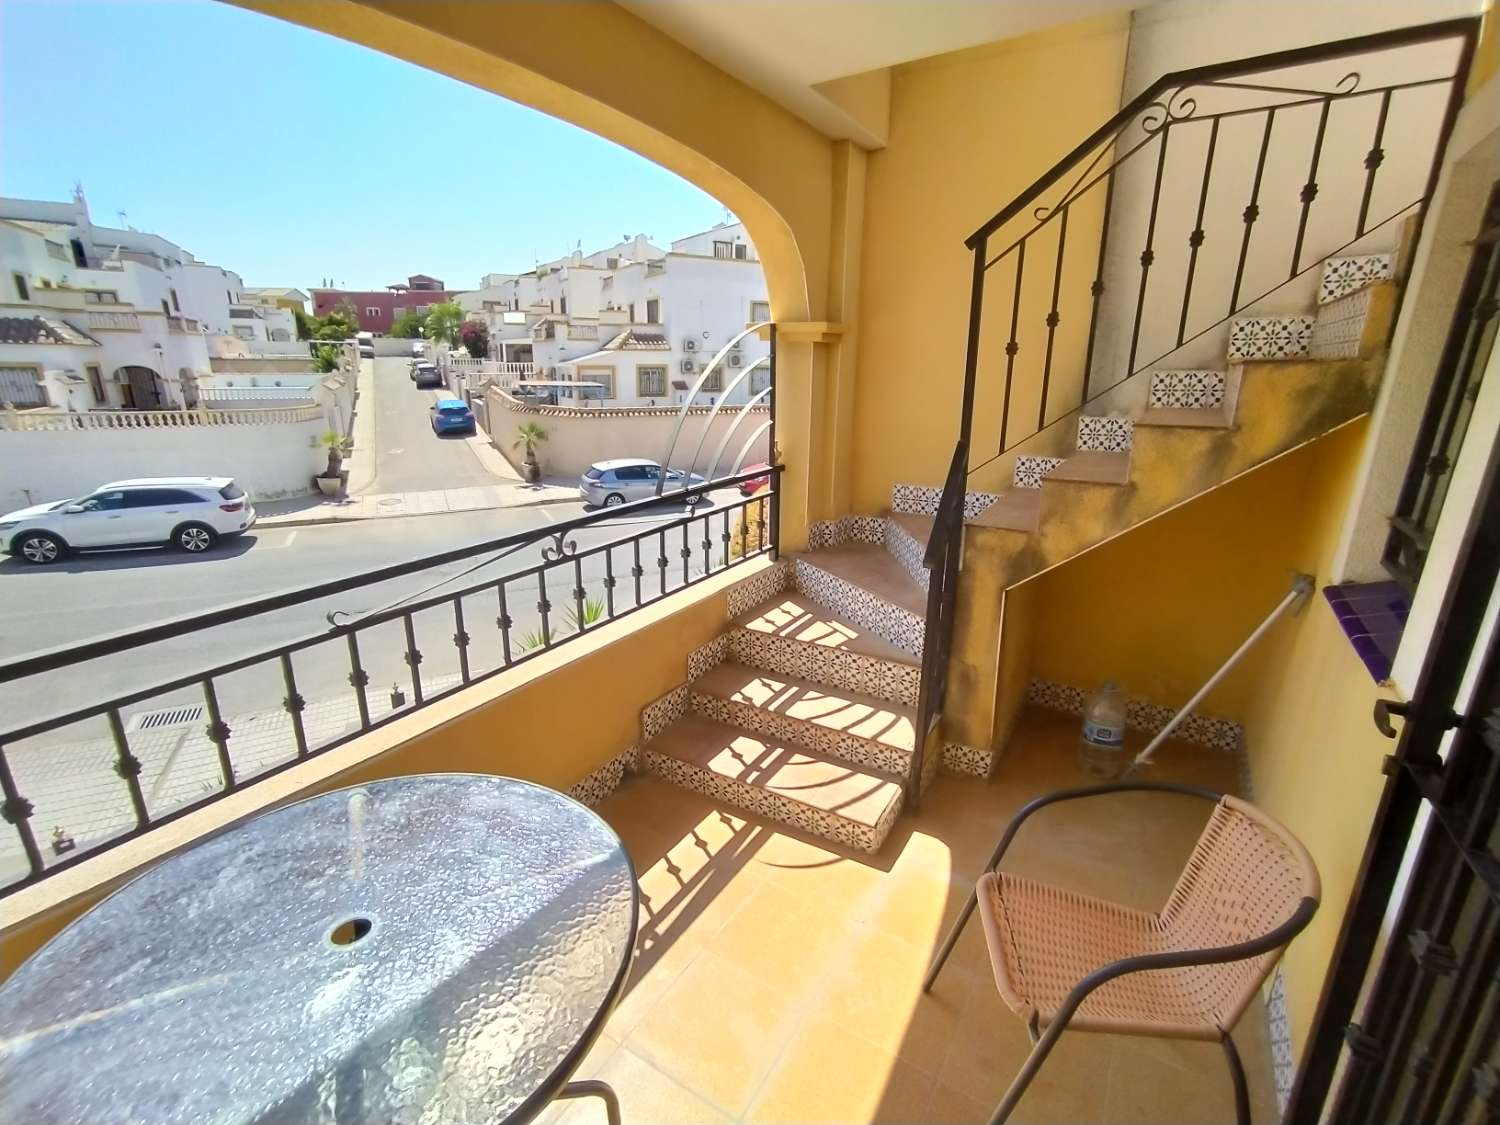 Upstairs apartment with 2 bedrooms and 1 bathroom overlooking the salt lake.